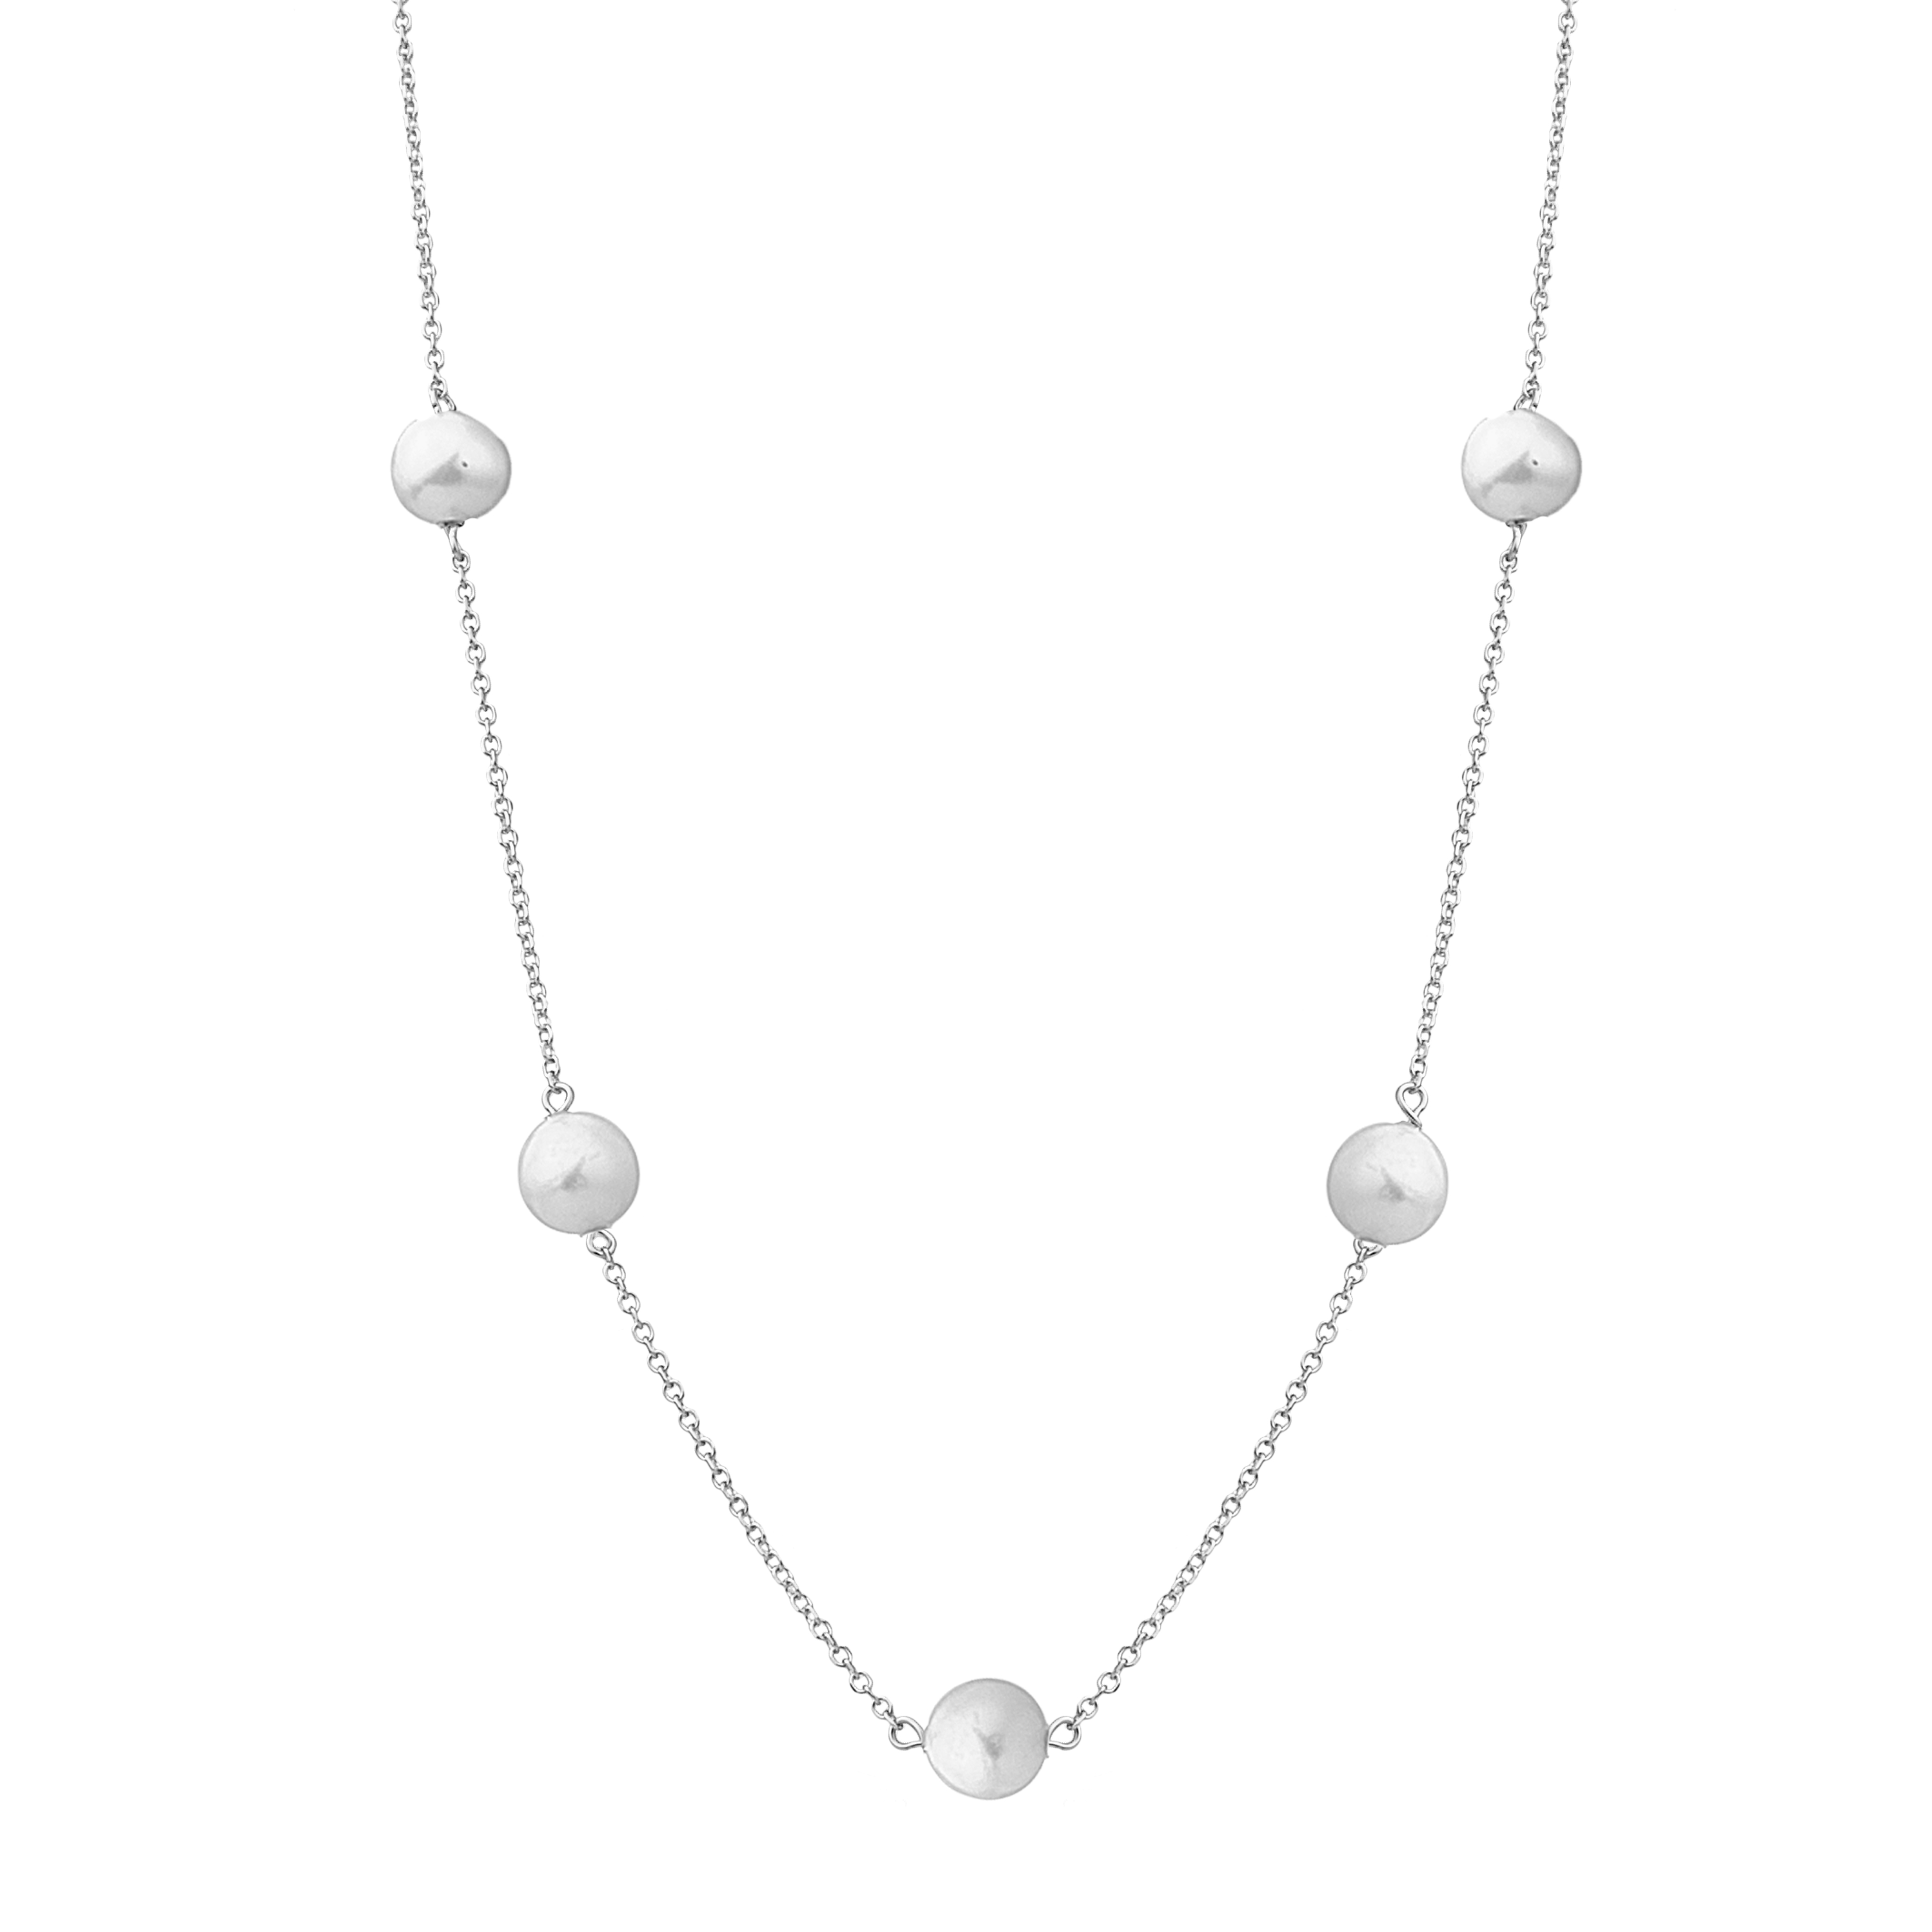 WHITE GOLD K14 NECKLACE WITH 5 PEARLS